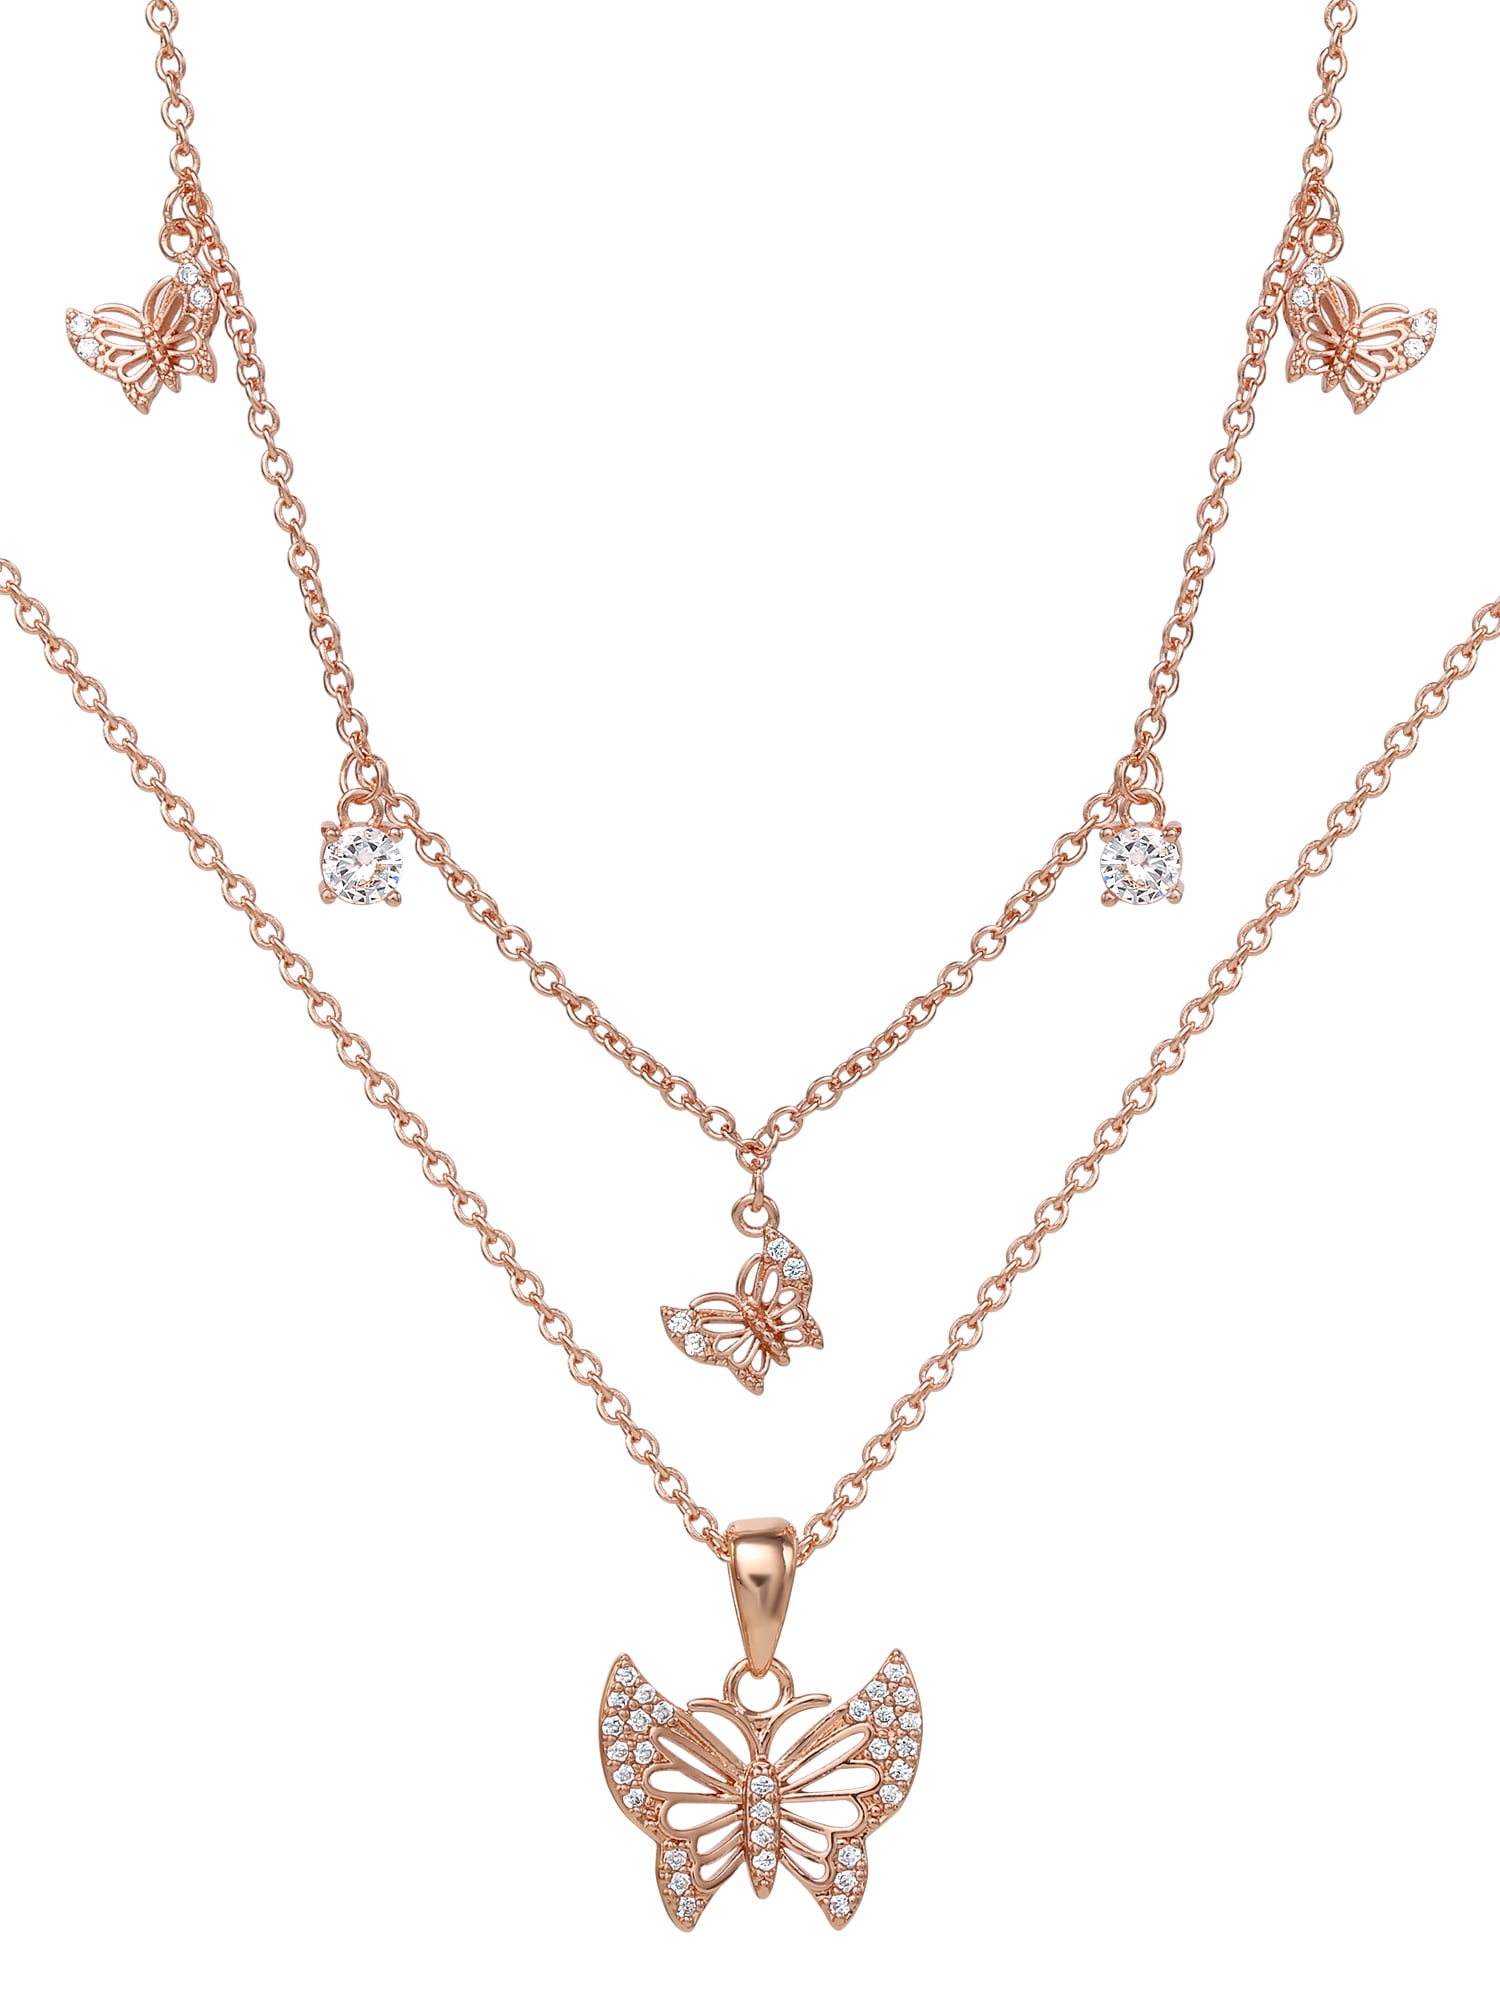 Buy Gold Butterfly Necklace Online in India - Etsy